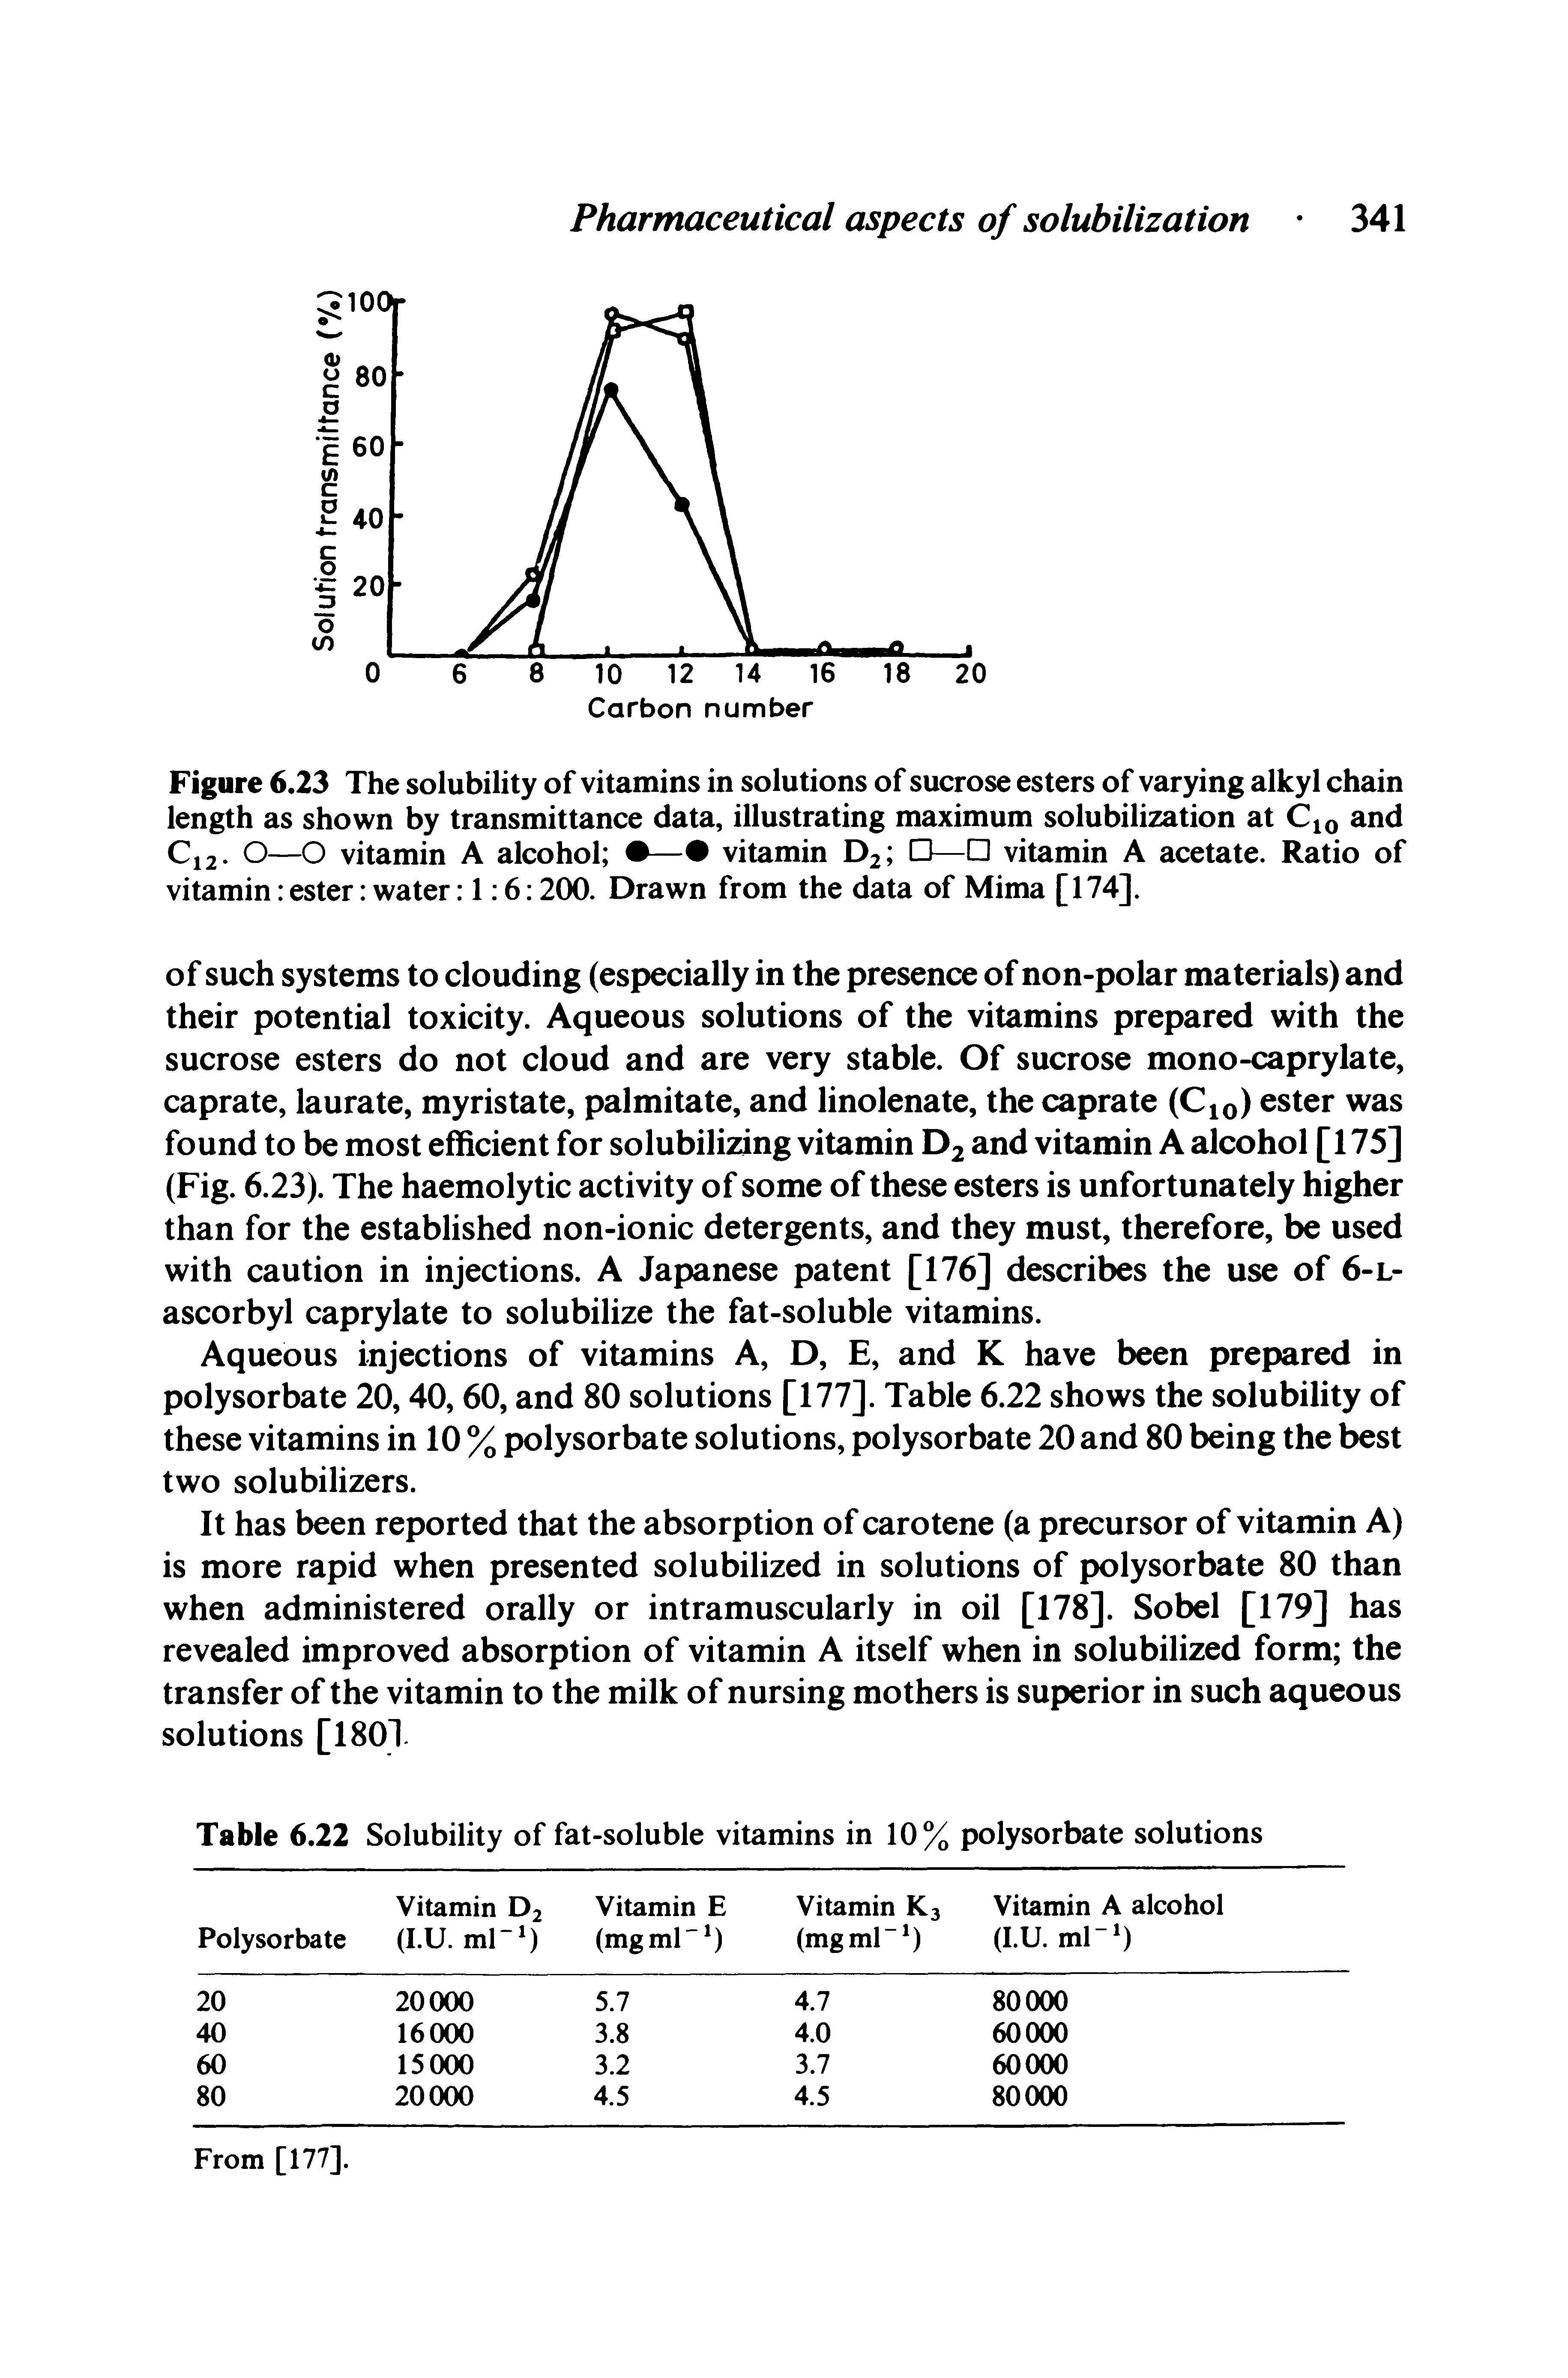 Figure 6.23 The solubility of vitamins in solutions of sucrose esters of varying alkyl chain length as shown by transmittance data, illustrating maximum solubilization at C q and Ci2. O—O vitamin A alcohol — vitamin D2 — vitamin A acetate. Ratio of vitamin ester water 1 6 200. Drawn from the data of Mima [174].